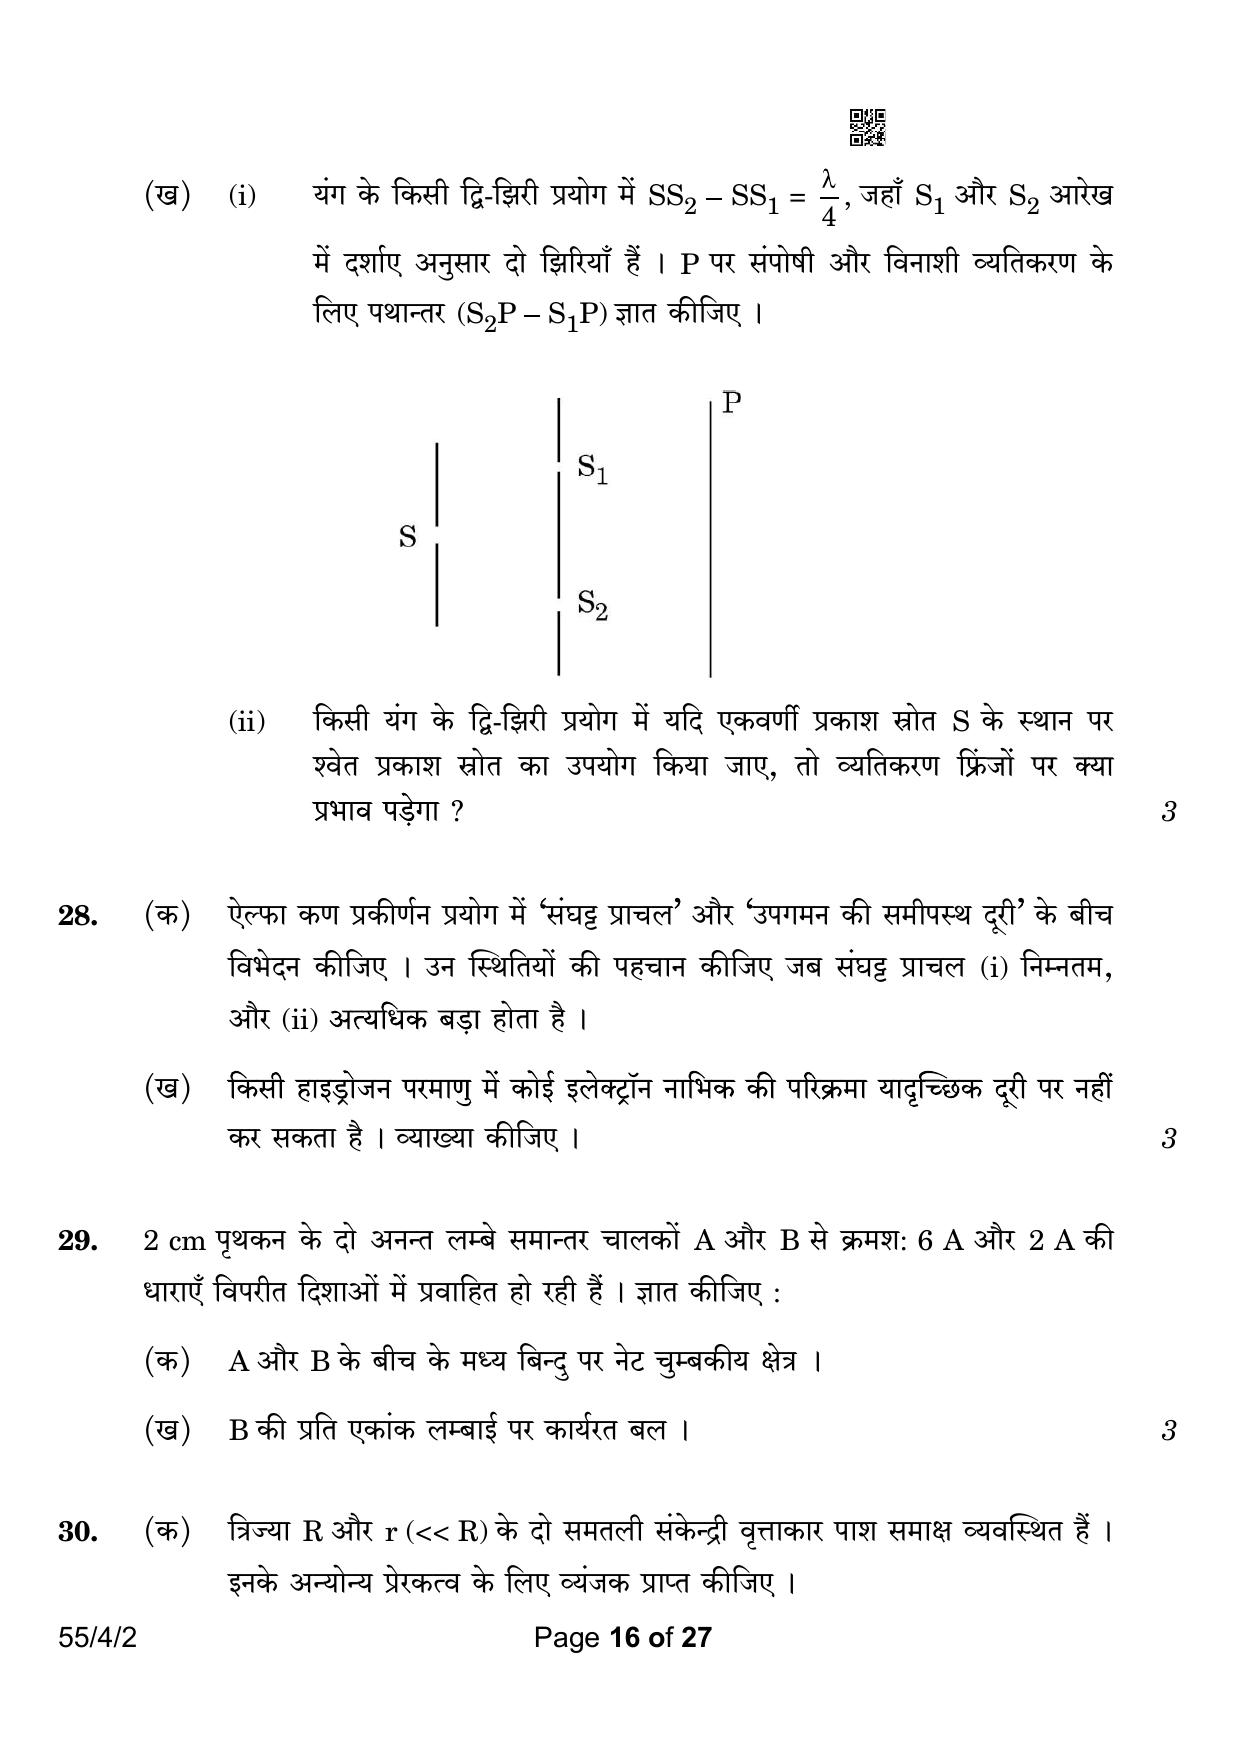 CBSE Class 12 55-4-2 Physics 2023 Question Paper - Page 16